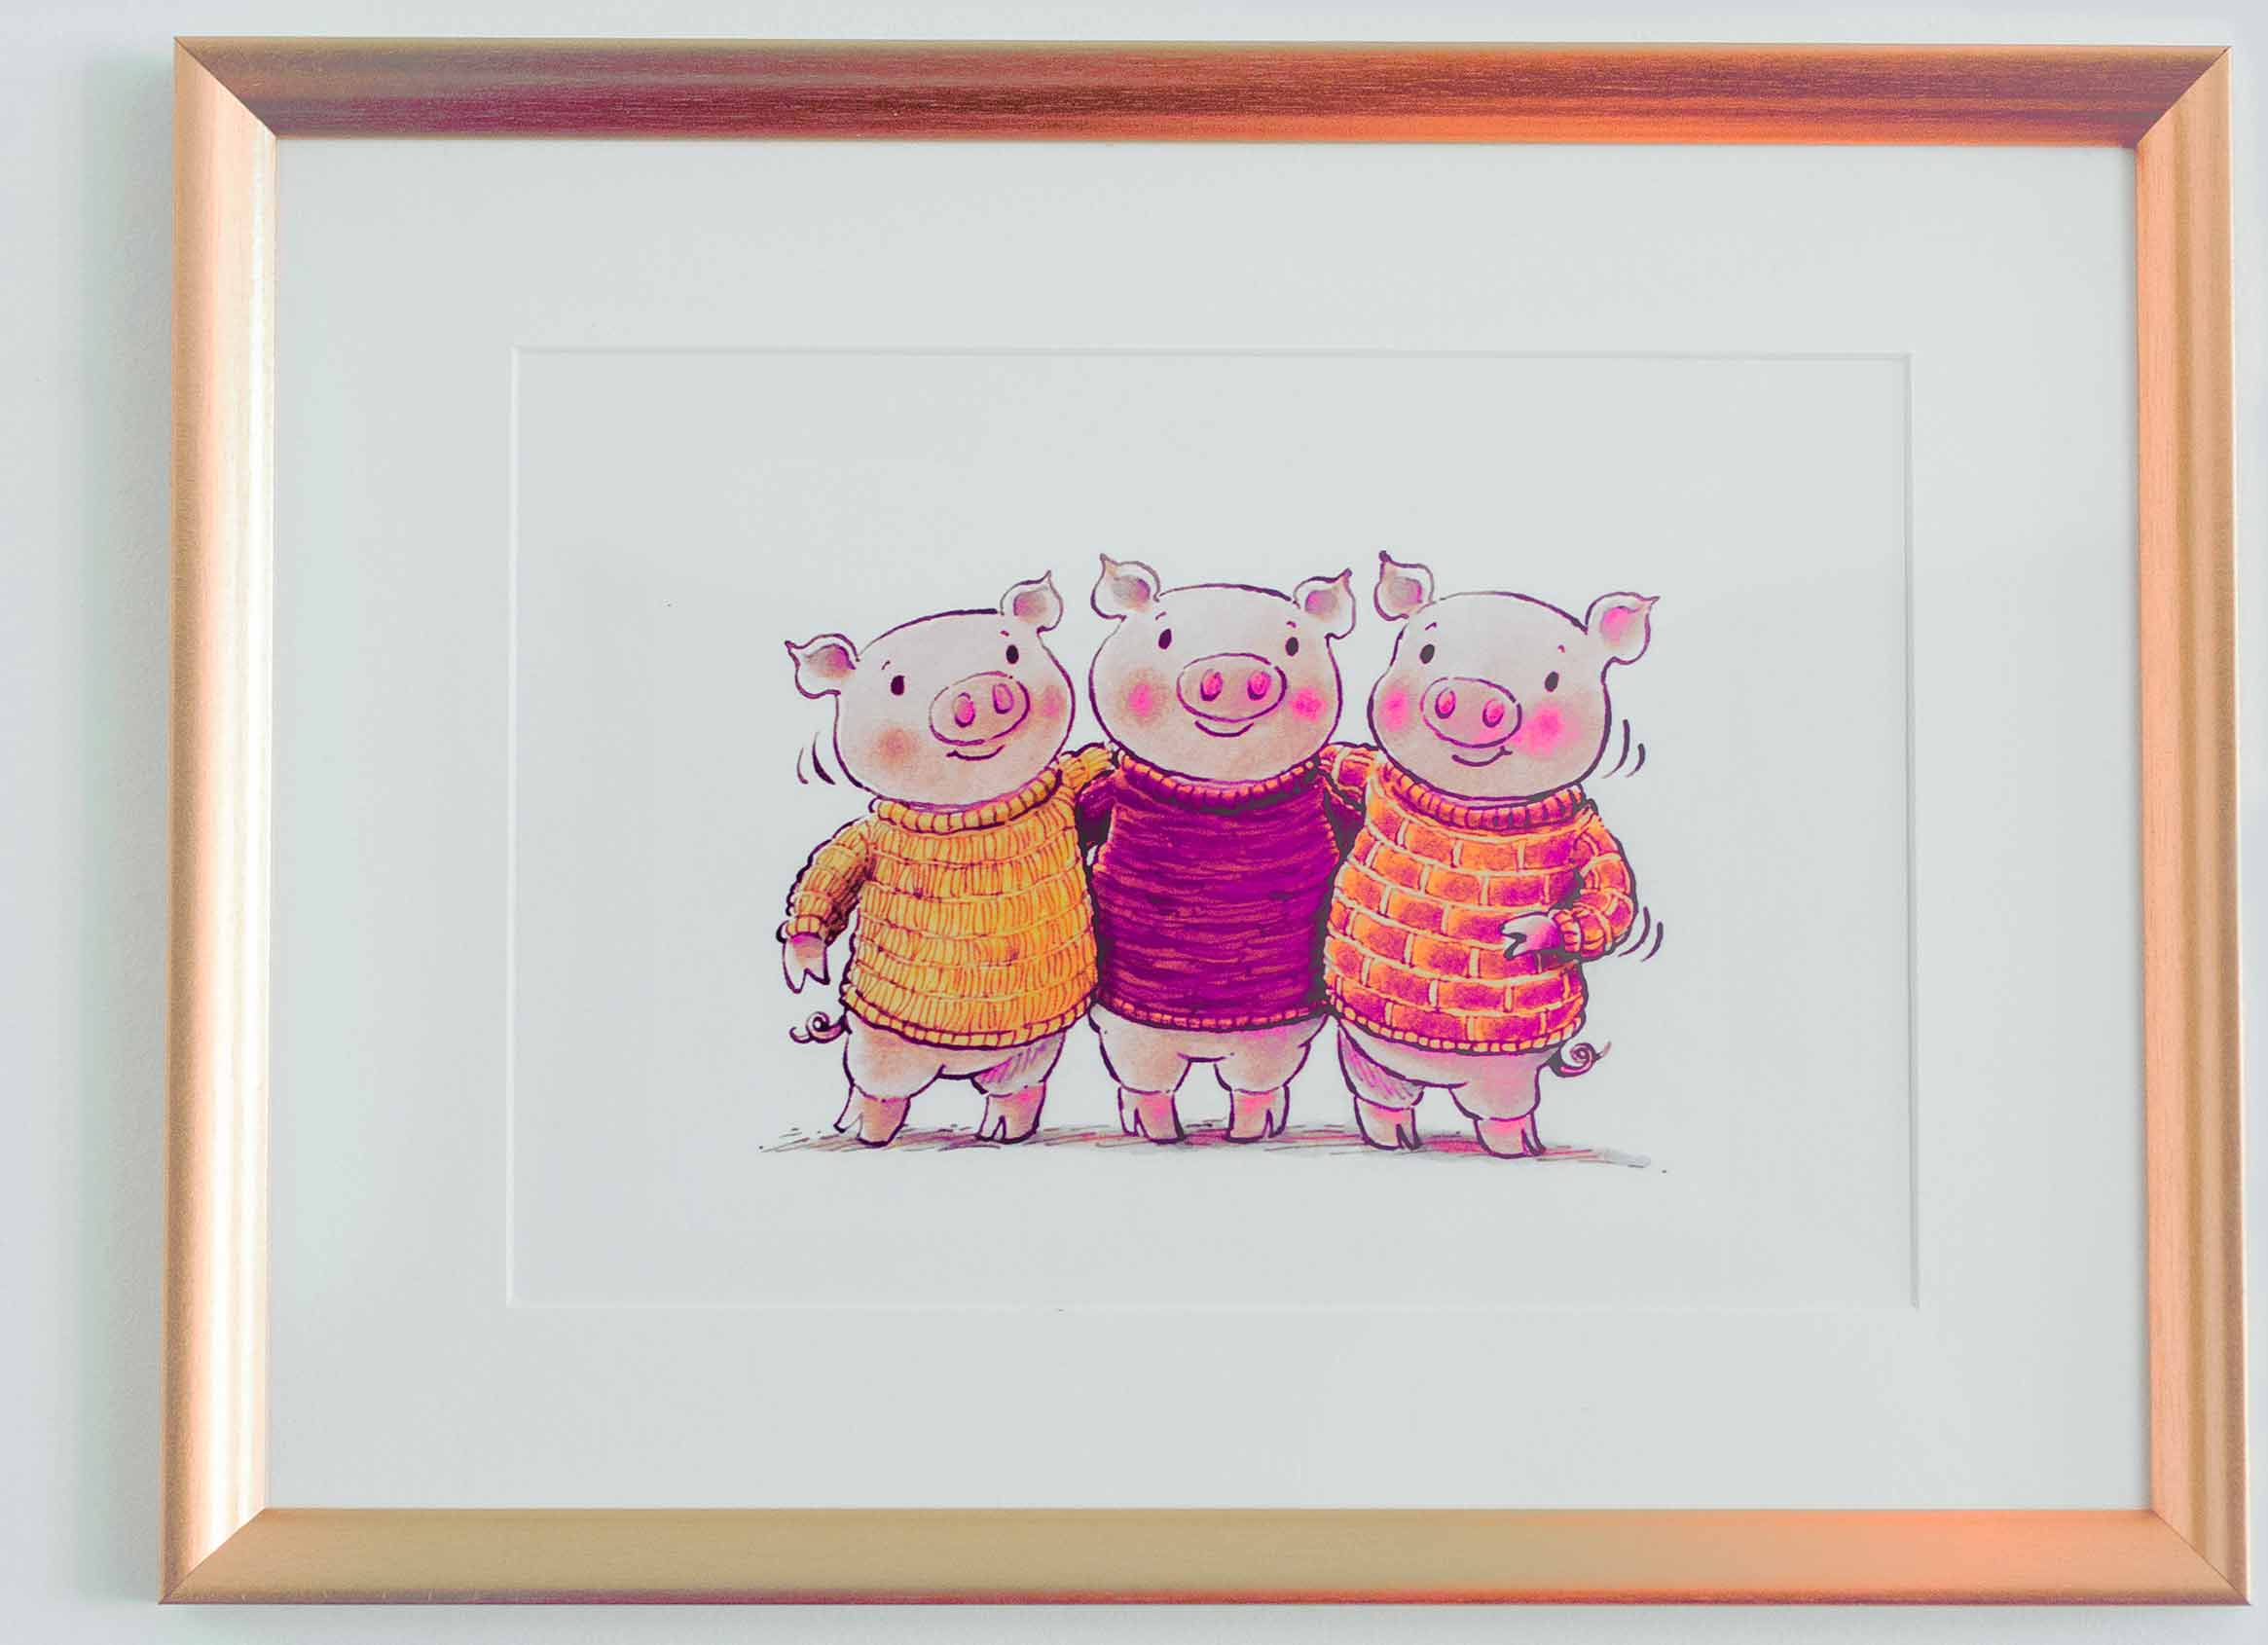 Three pigs illustration in a picture frame